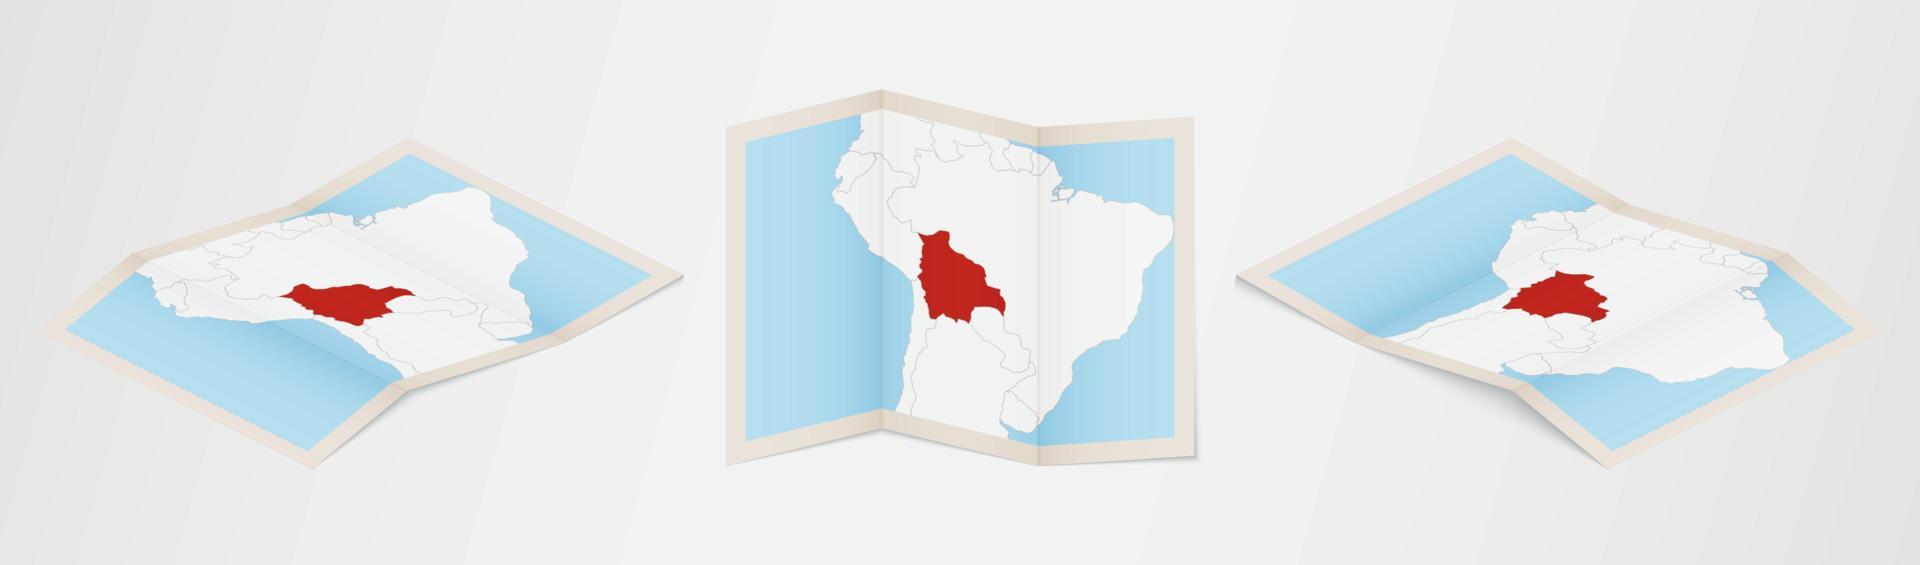 Folded map of Bolivia in three different versions. vector